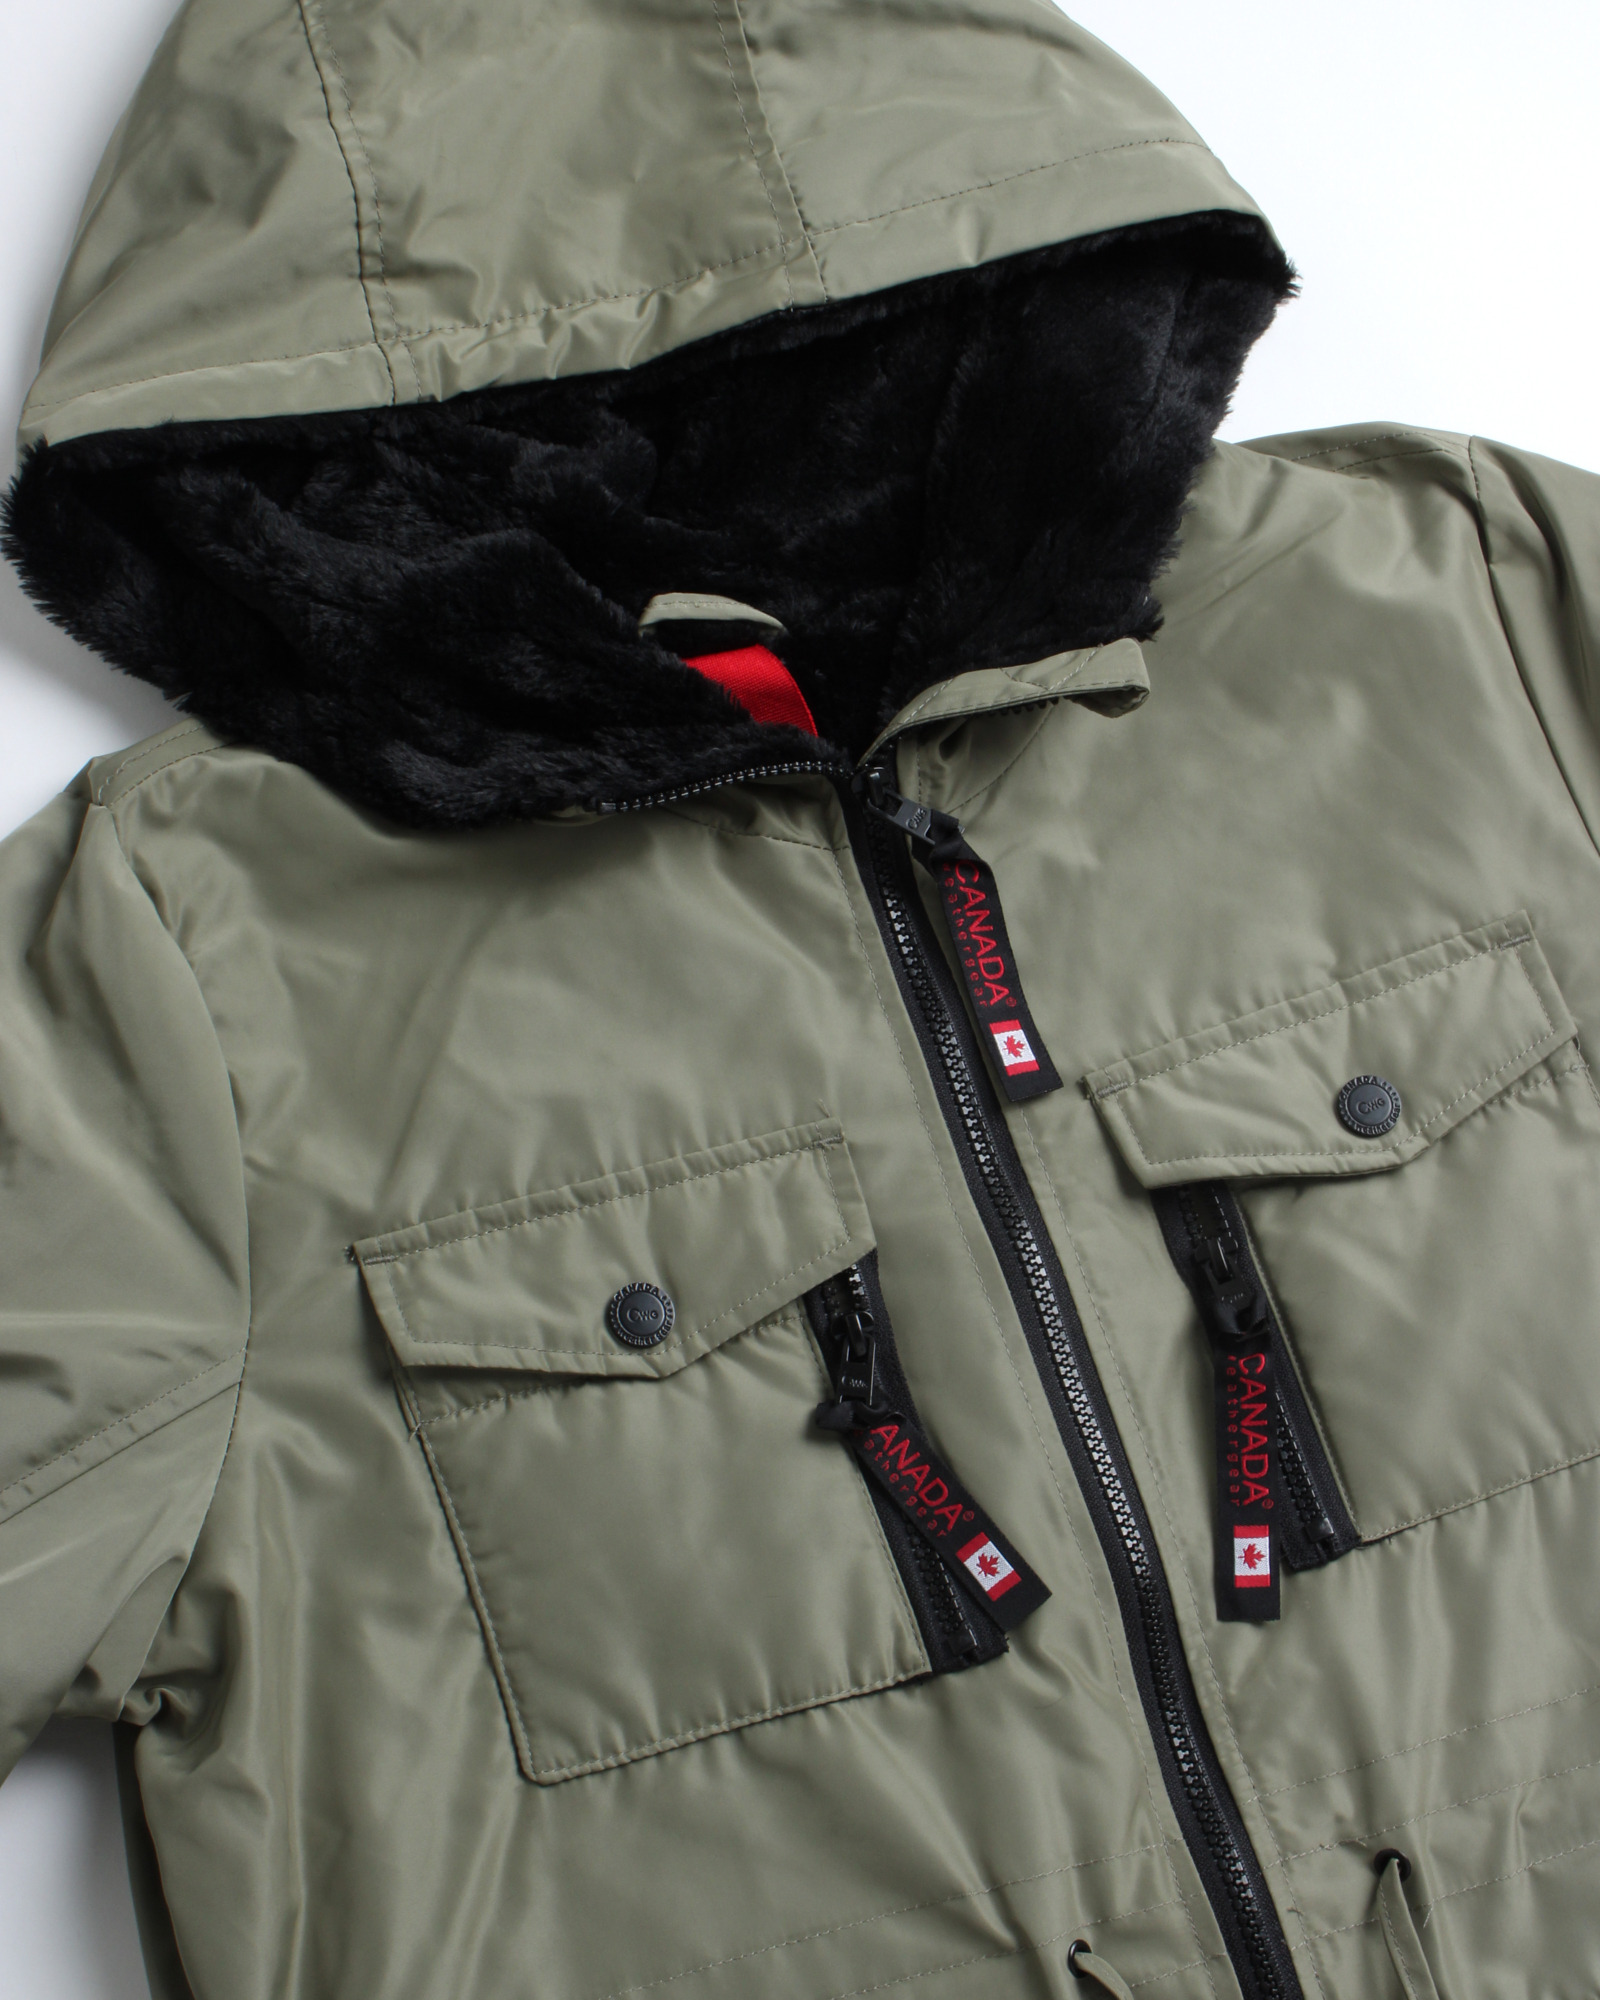 CANADA WEATHER GEAR Womens Winter Coat – Heavyweight Sherpa Lined Anorak Parka (S-XL) - image 3 of 7